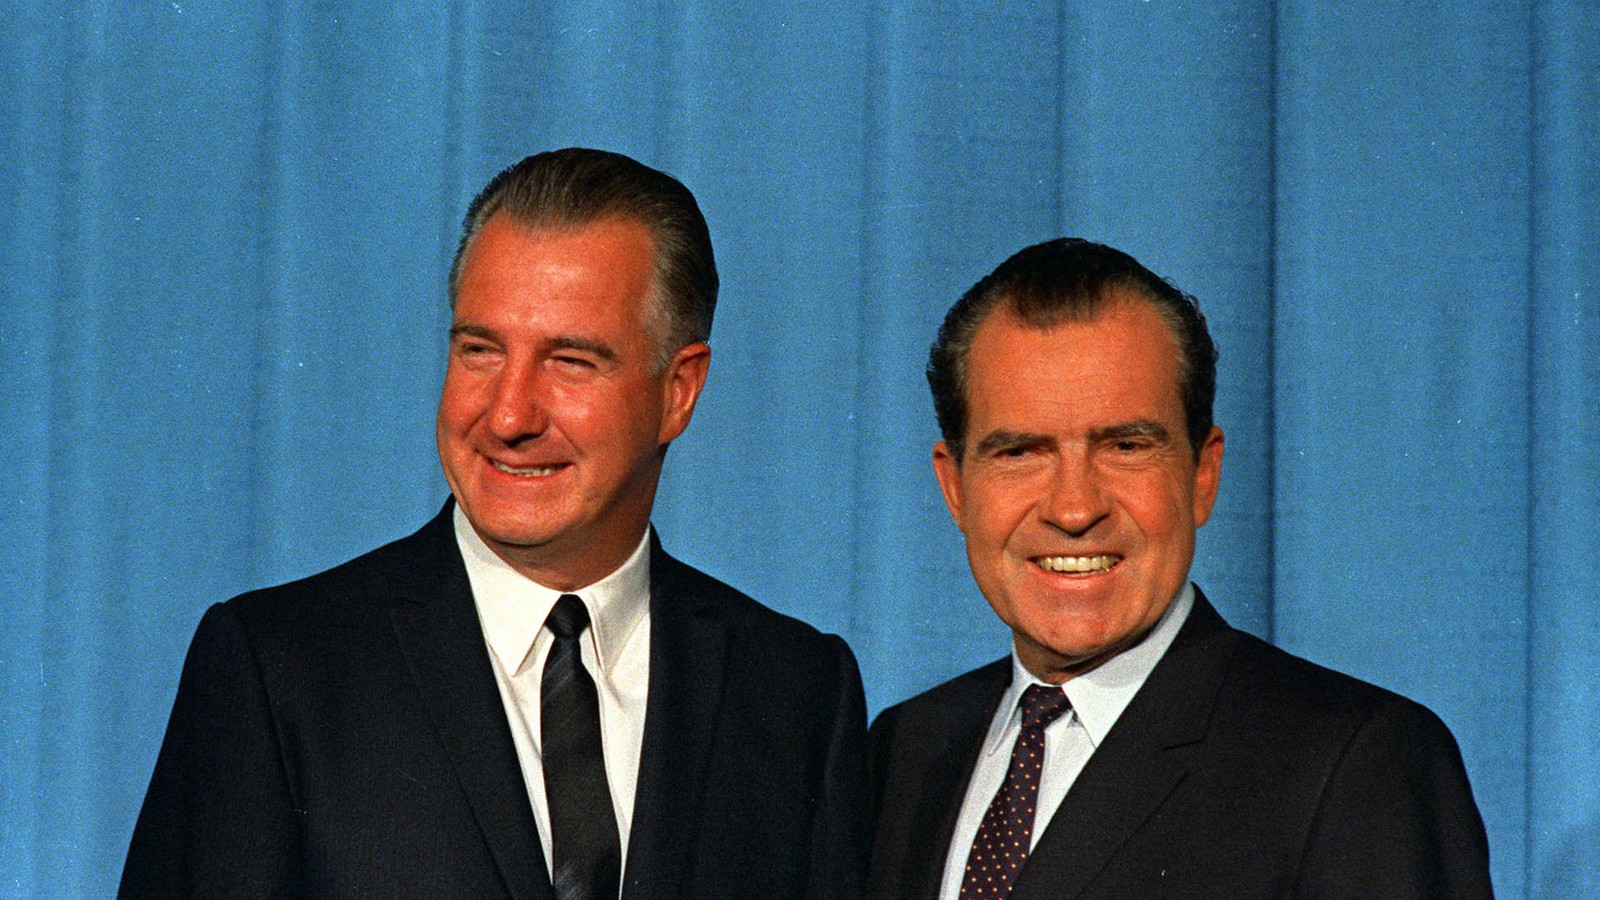 Richard Nixon's Relationship With Spiro Agnew Shows Why the Vice Presidency Matters